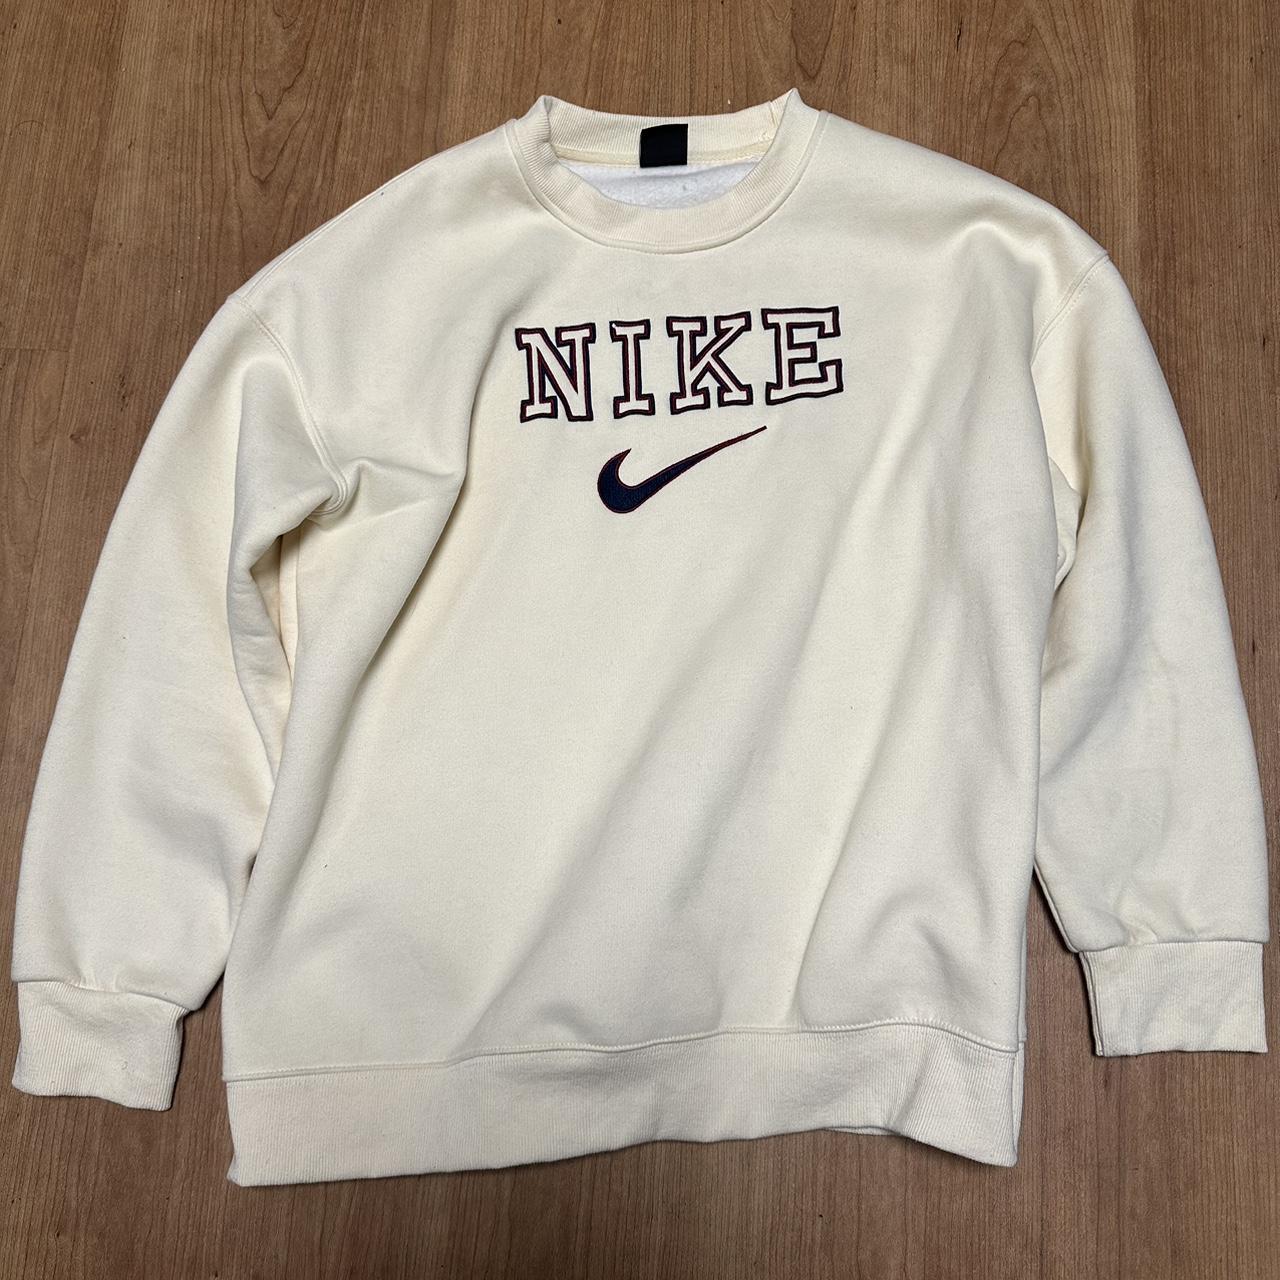 Nike Crewneck Great Condition Willing to take... - Depop